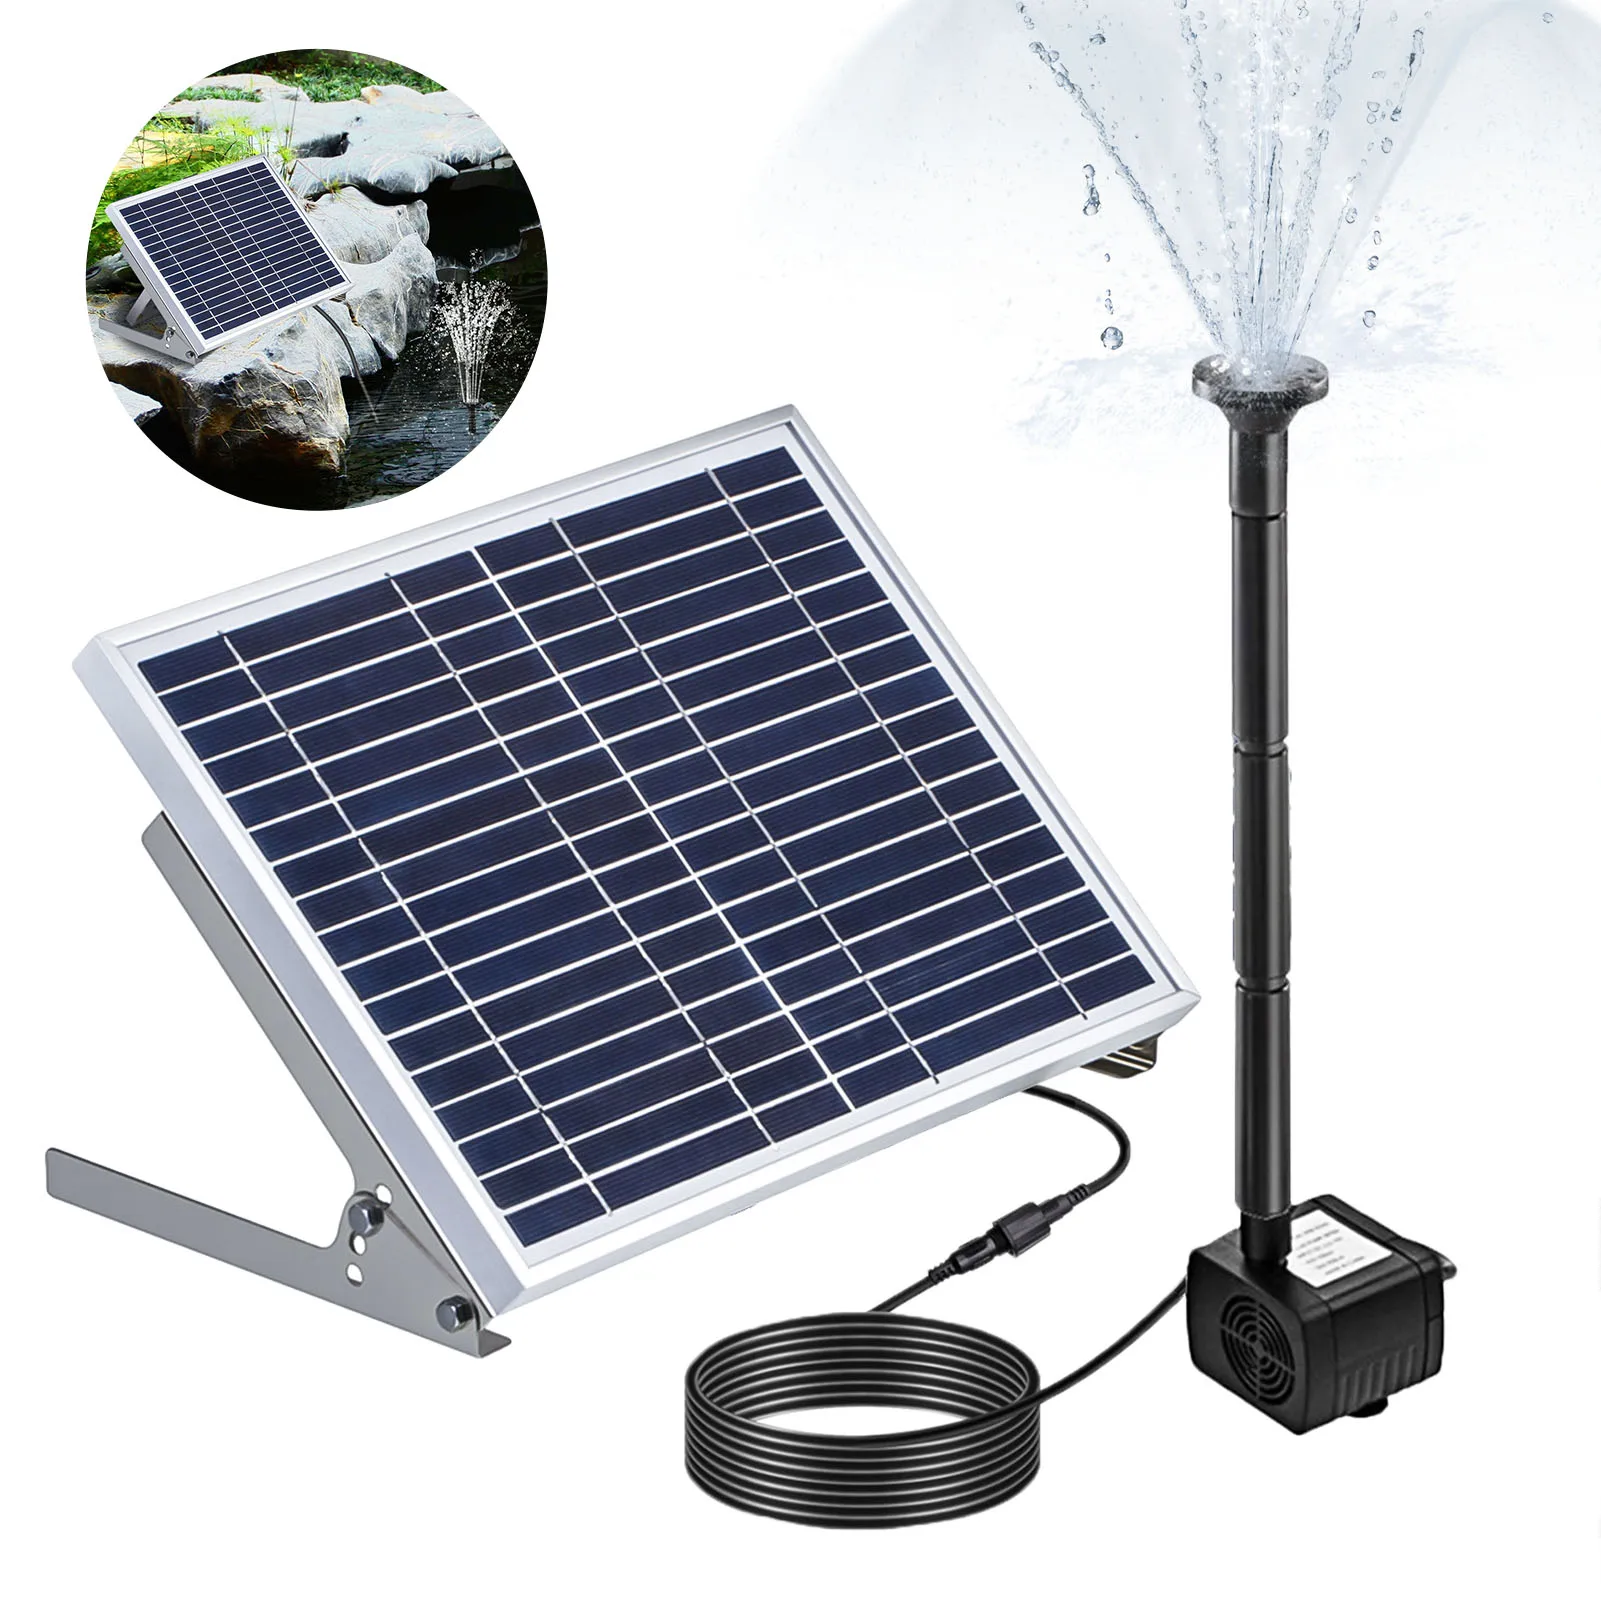 10W Solar Fountain Pump with Solar Panel 3 Nozzles Max. Water Height 200cm for Bird Bath Fish Tank Small Pond Garden Decoration